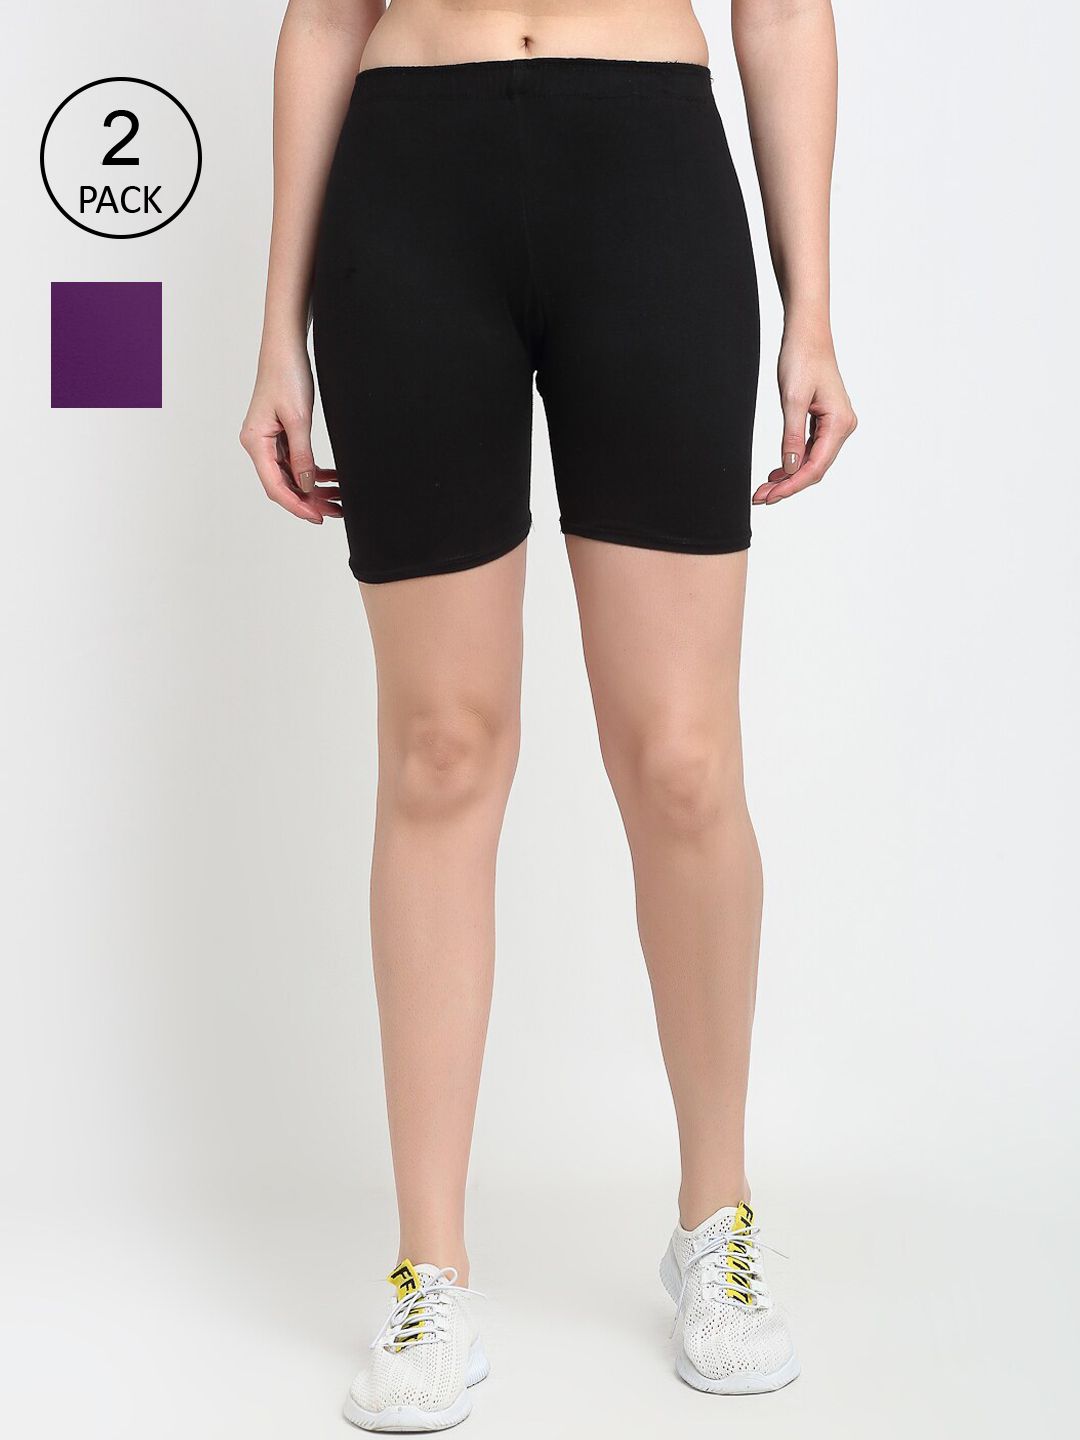 GRACIT Women Black & Purple Pack of 2 Cycling Sports Shorts Price in India